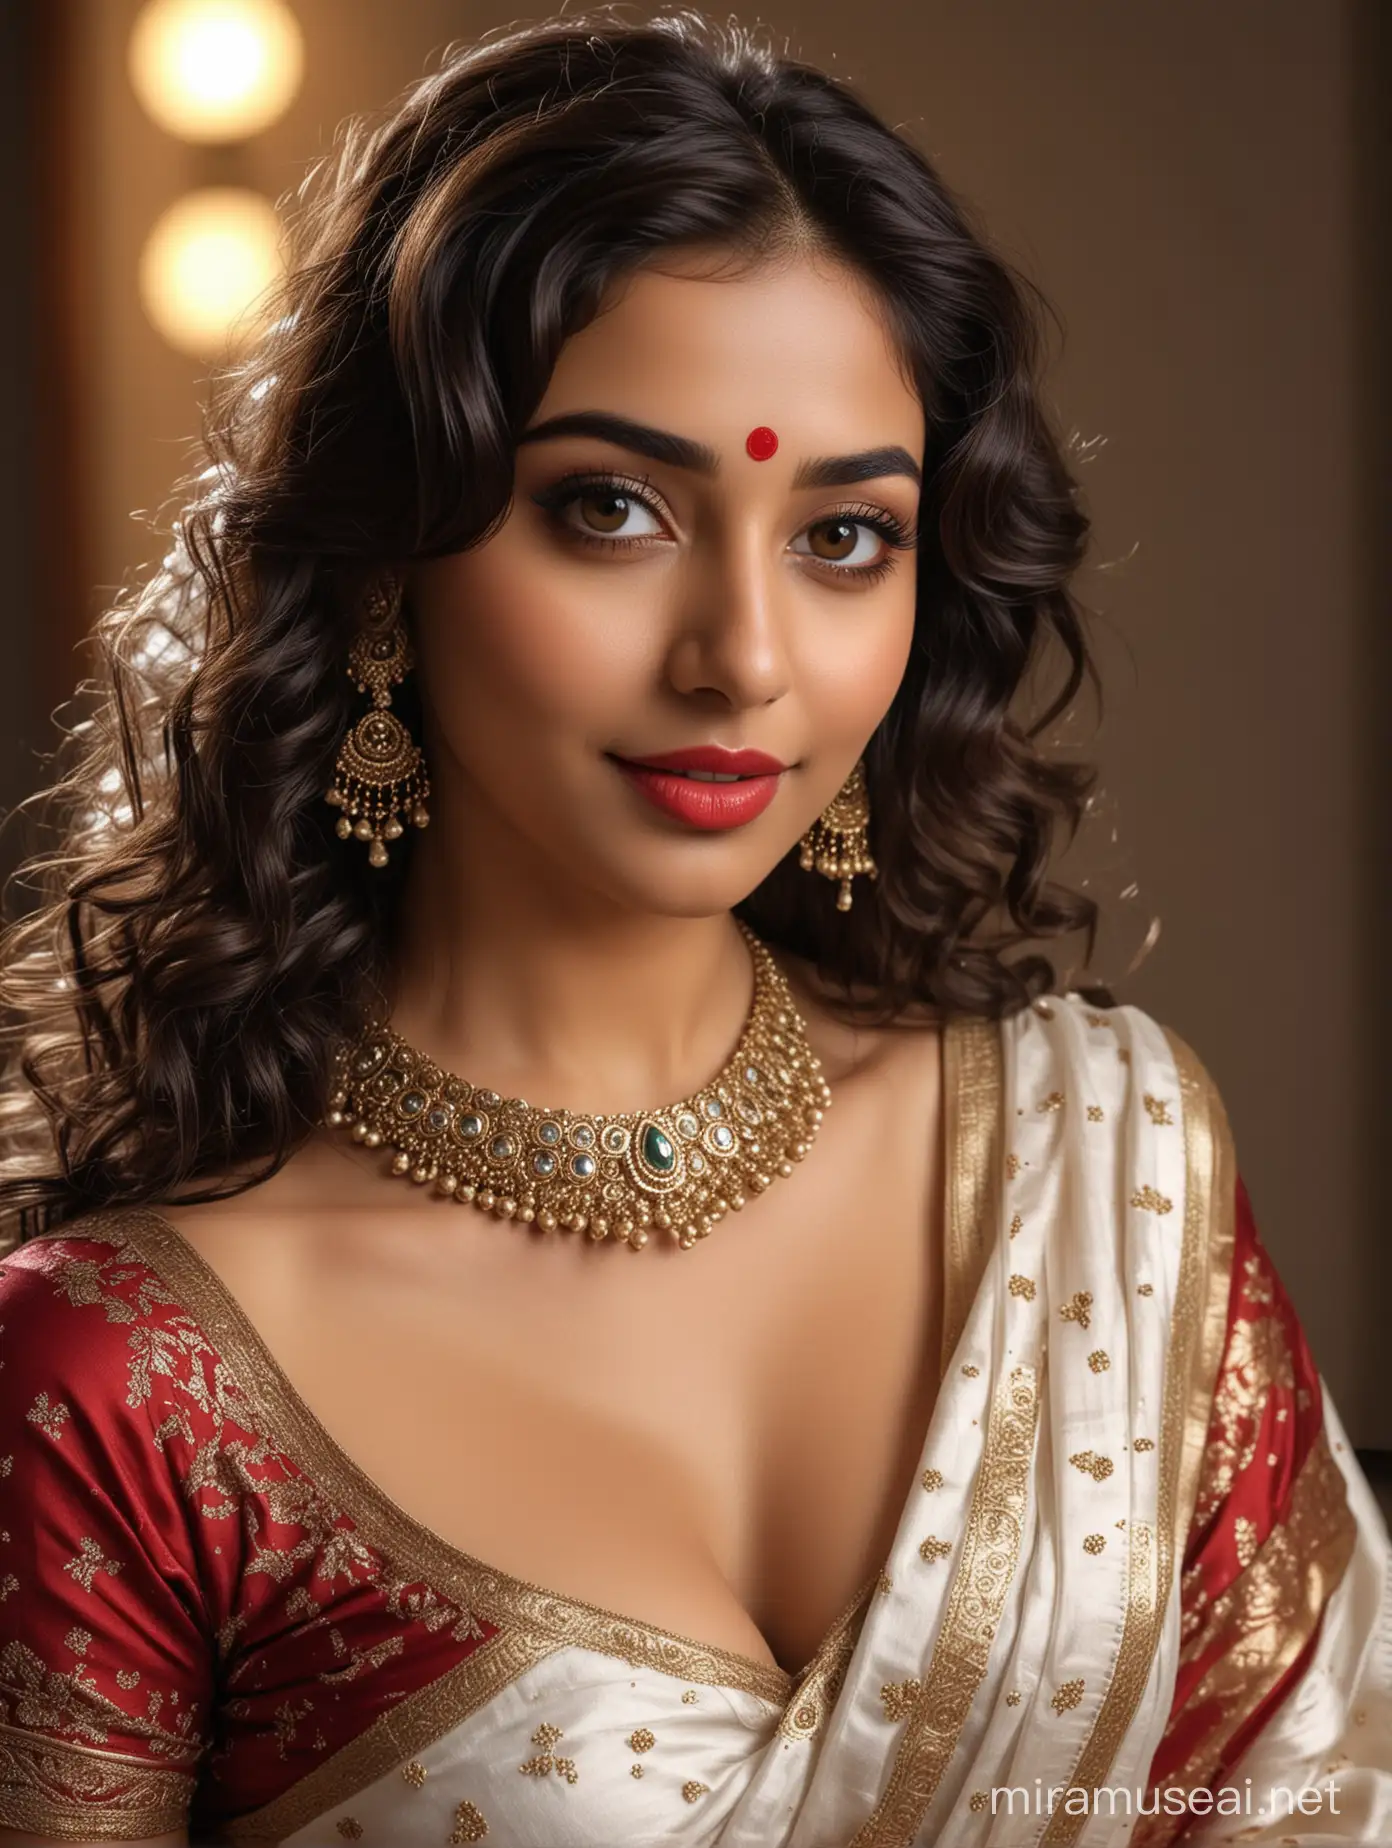 full body photo of most beautiful european woman as beautiful indian woman, big wide  black eyes with eye makeup,  thick long curly hair , face completely bent down, wide big eyes, brows raised, eyes looking up, looking back over shoulders, innocent alluring sexy looks, shy wide smile, intimate looks, bridal makeup, full body jewelry, perfect symmetric face and eyes, full breasts, glossy dark red lipsticks, intimate alluring smile, come get me looks , vulnerable i am yours feeling in looks, elegant traditional  modest saree  , elegant look, biting lip with ecstasy, 
 blushed cheeks, intricate details, photo realistic, 4k.